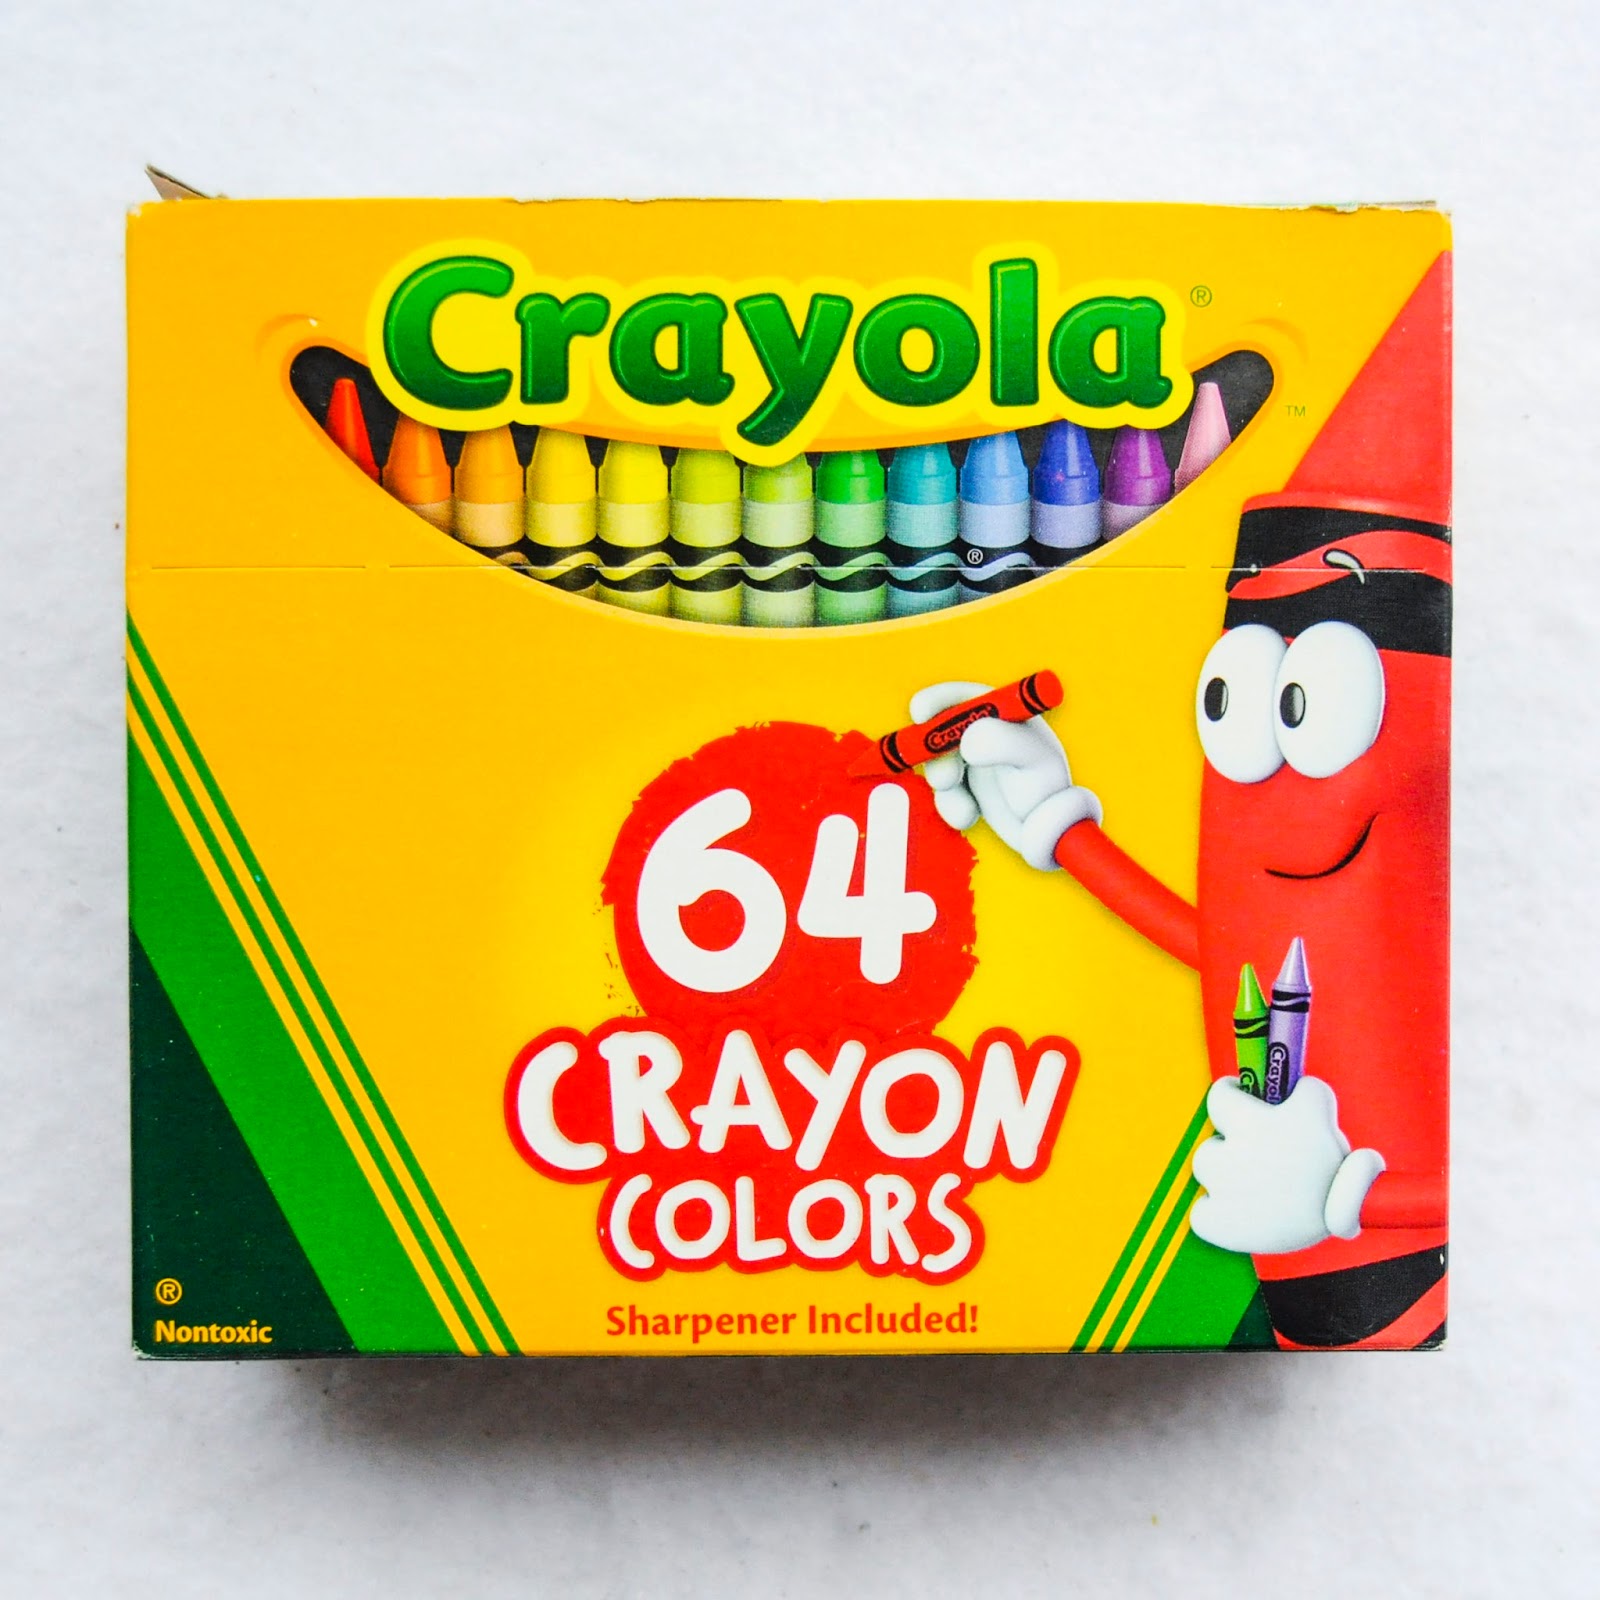 64 Count Crayola Crayons: What's Inside the Box